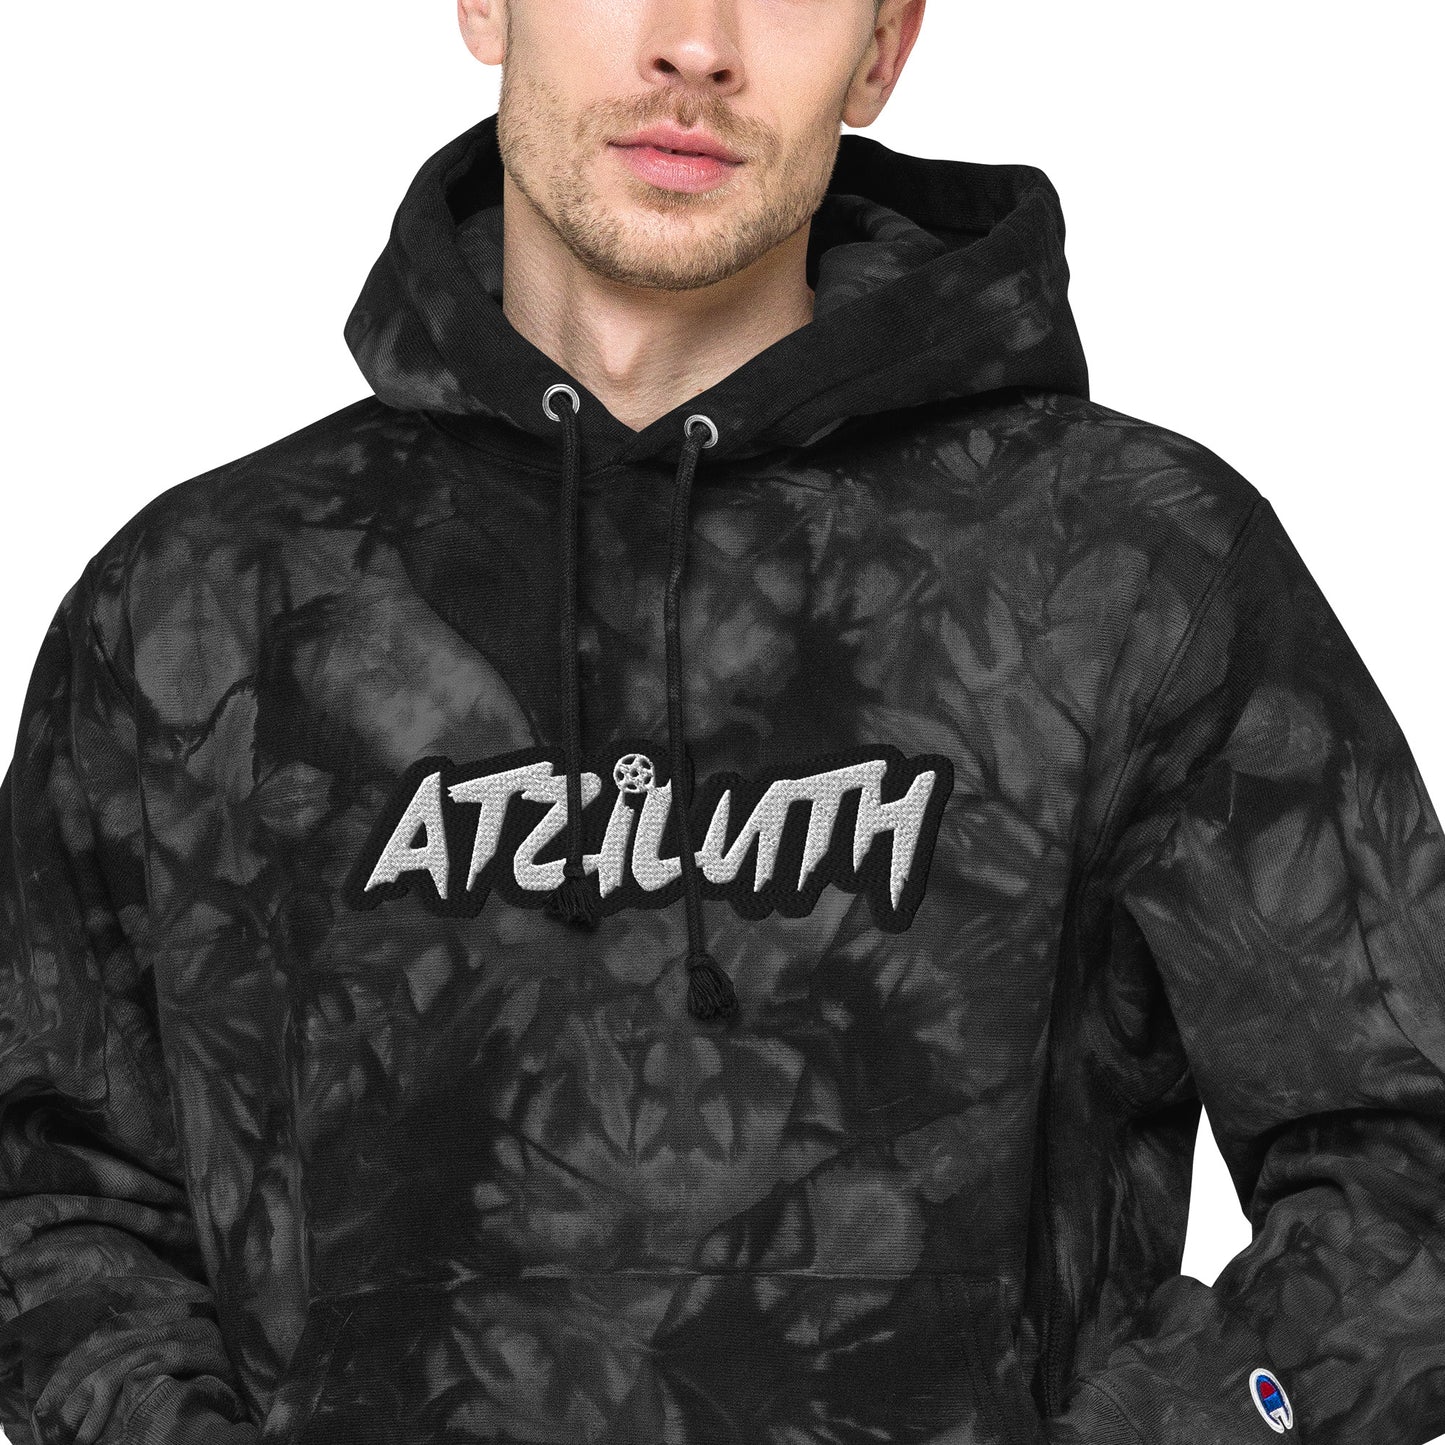 Atziluth Gallery Champion tie-dye hoodie